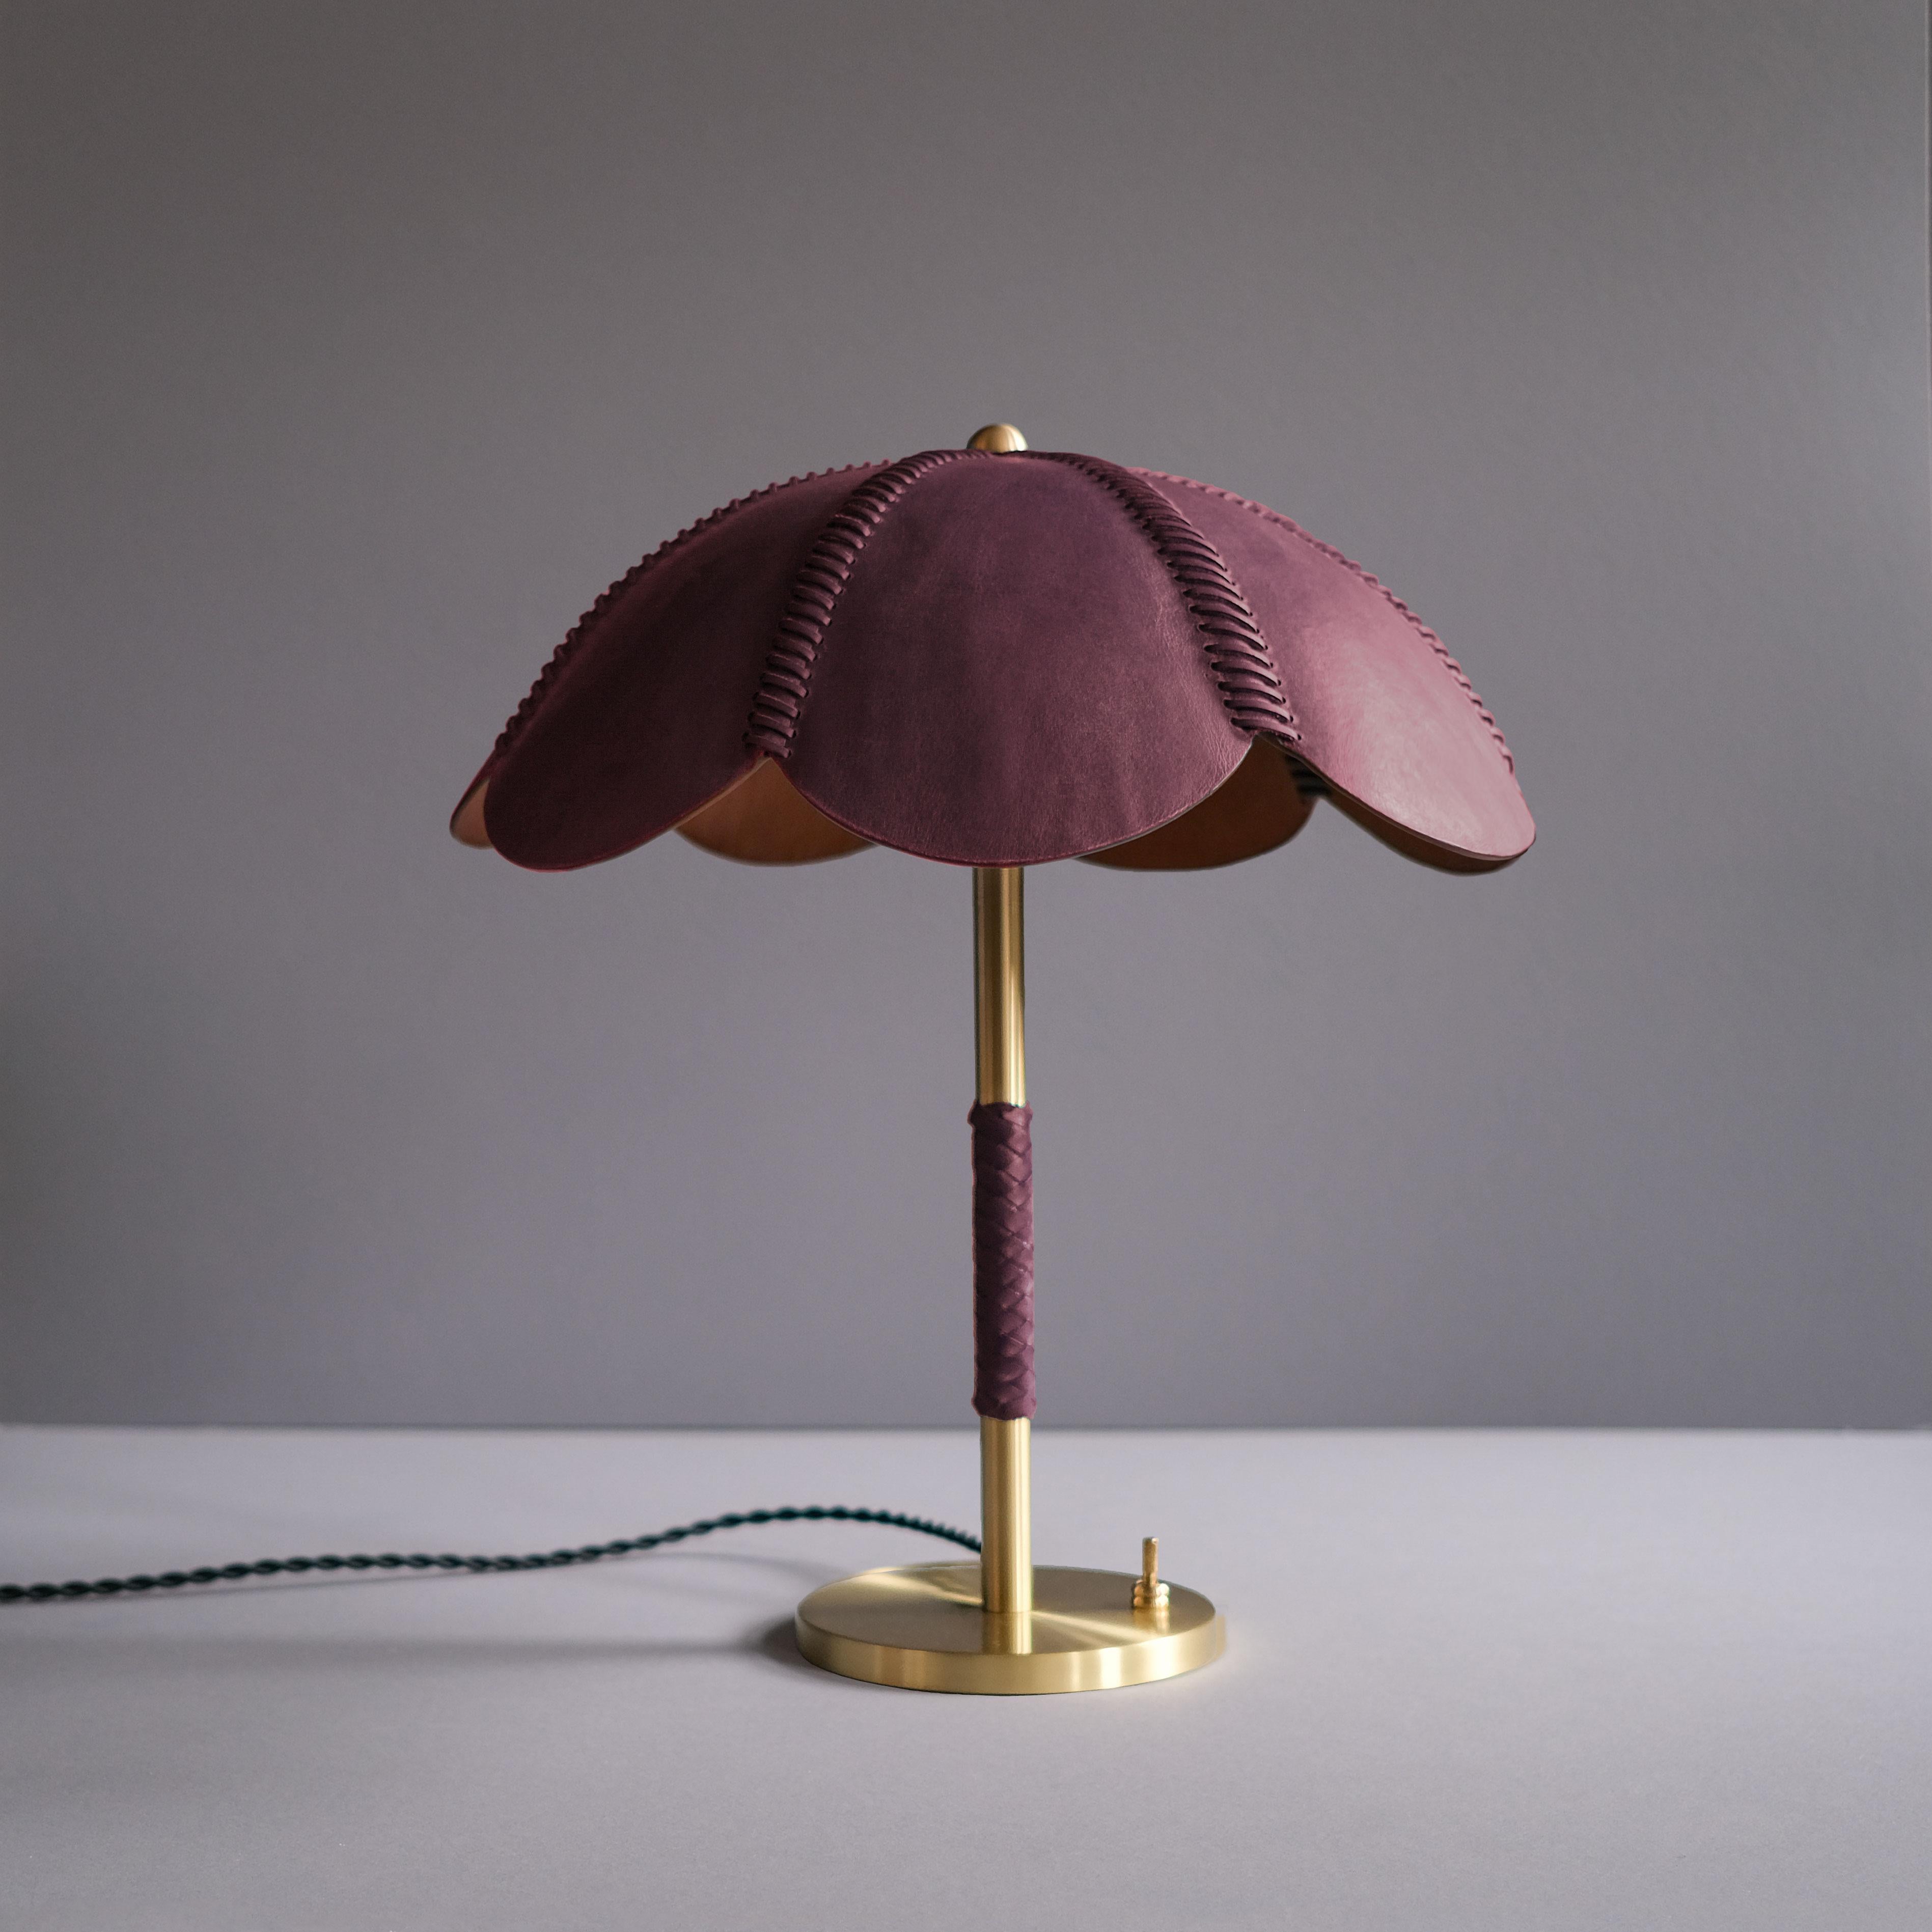 The lamps in this collection are inspired by Colombia’s equestrian heritage, layered with a jewel-toned color palette that takes inspiration from the works of
Colombian artist Fernando Botero.

Talabartero translates as ‘master saddler,’ and the